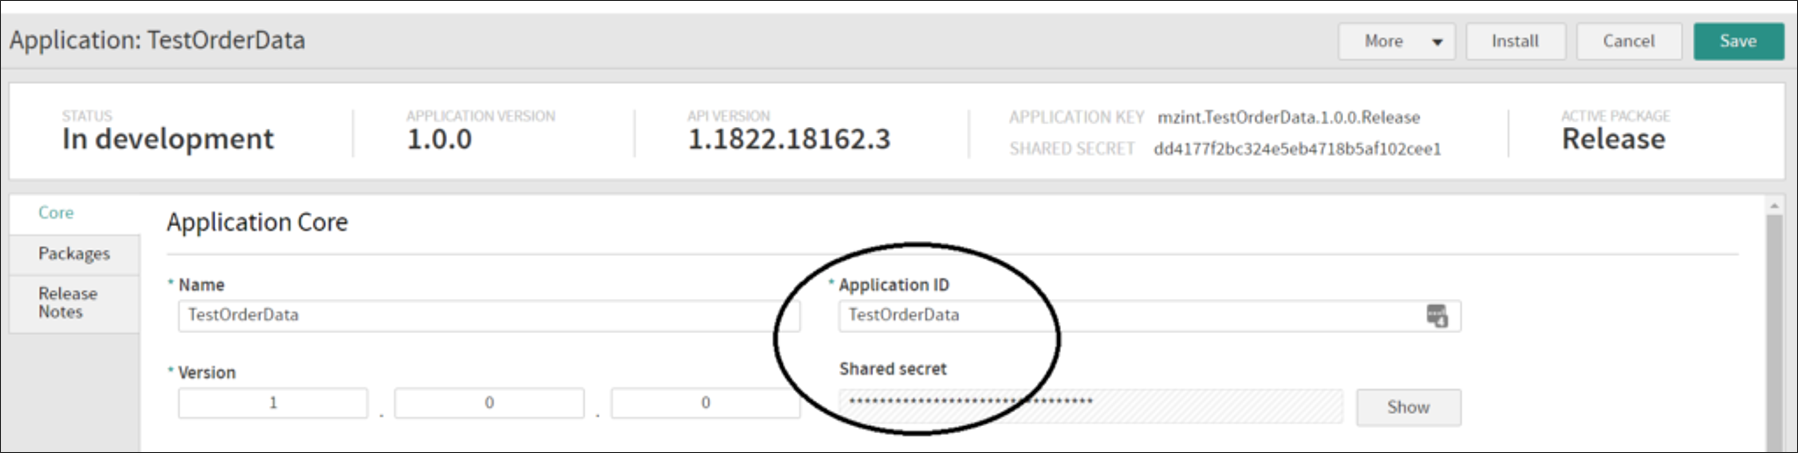 Callout of the Application ID and Shared Secret in the Dev Center